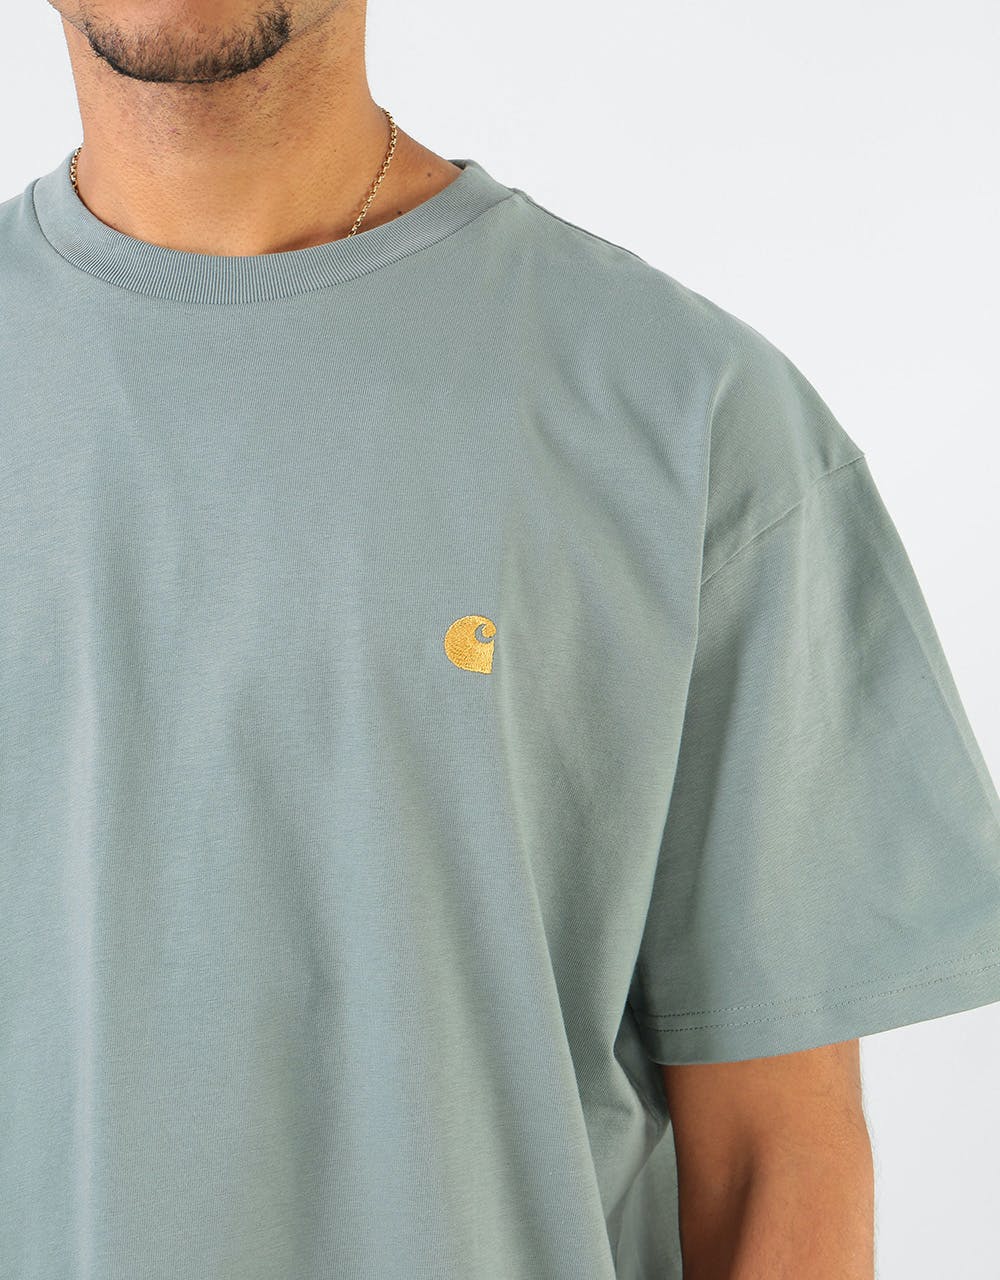 Carhartt WIP S/S Chase T-Shirt - Cloudy/Gold